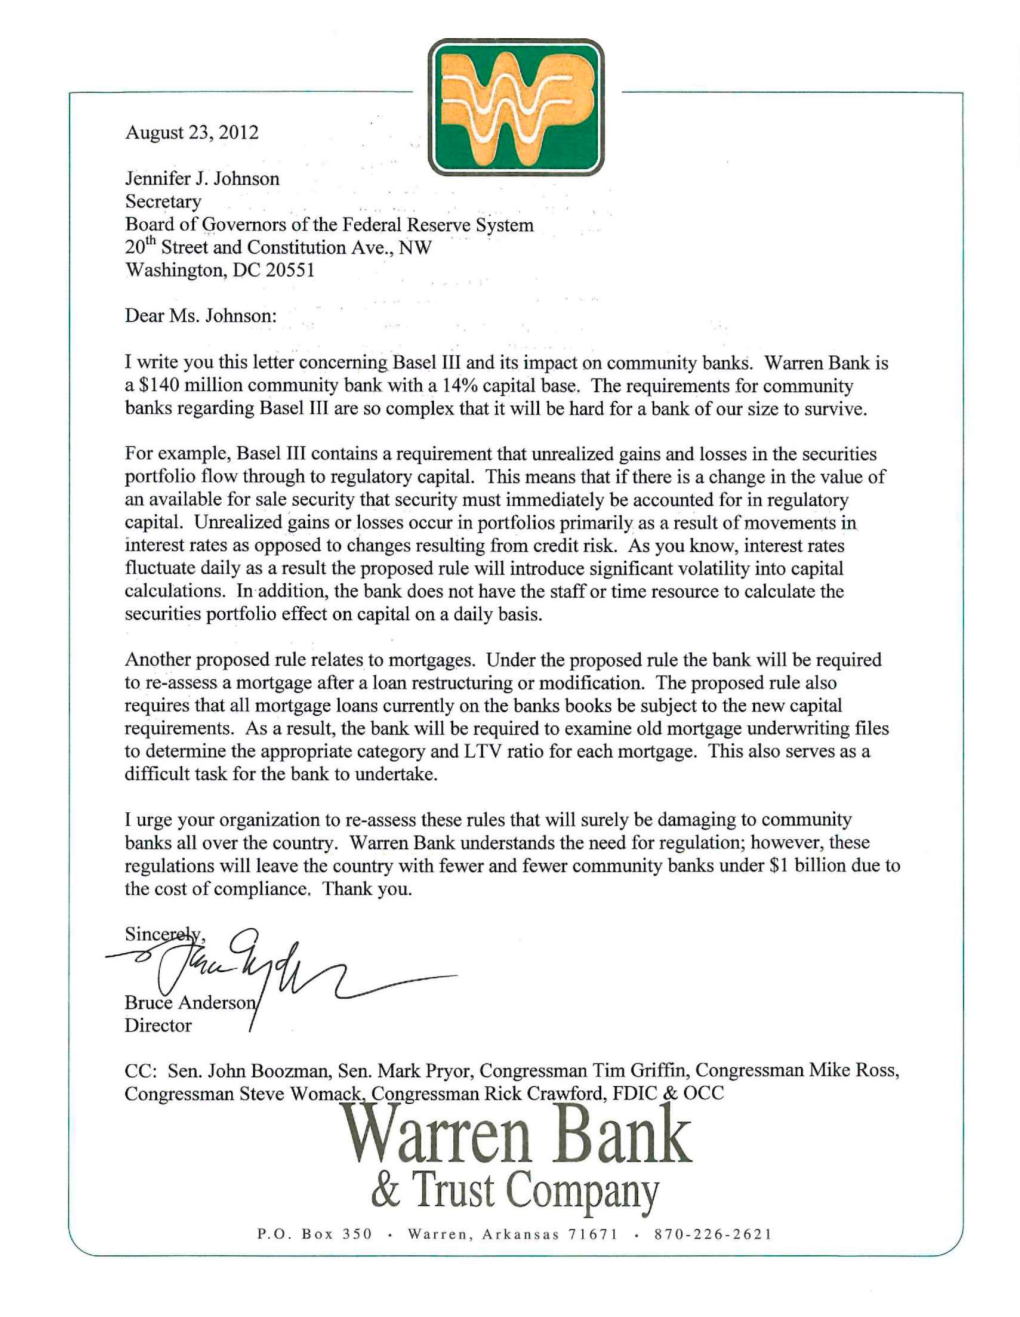 Warren Bank Is a $140 Million Community Bank with a 14% Capital Base